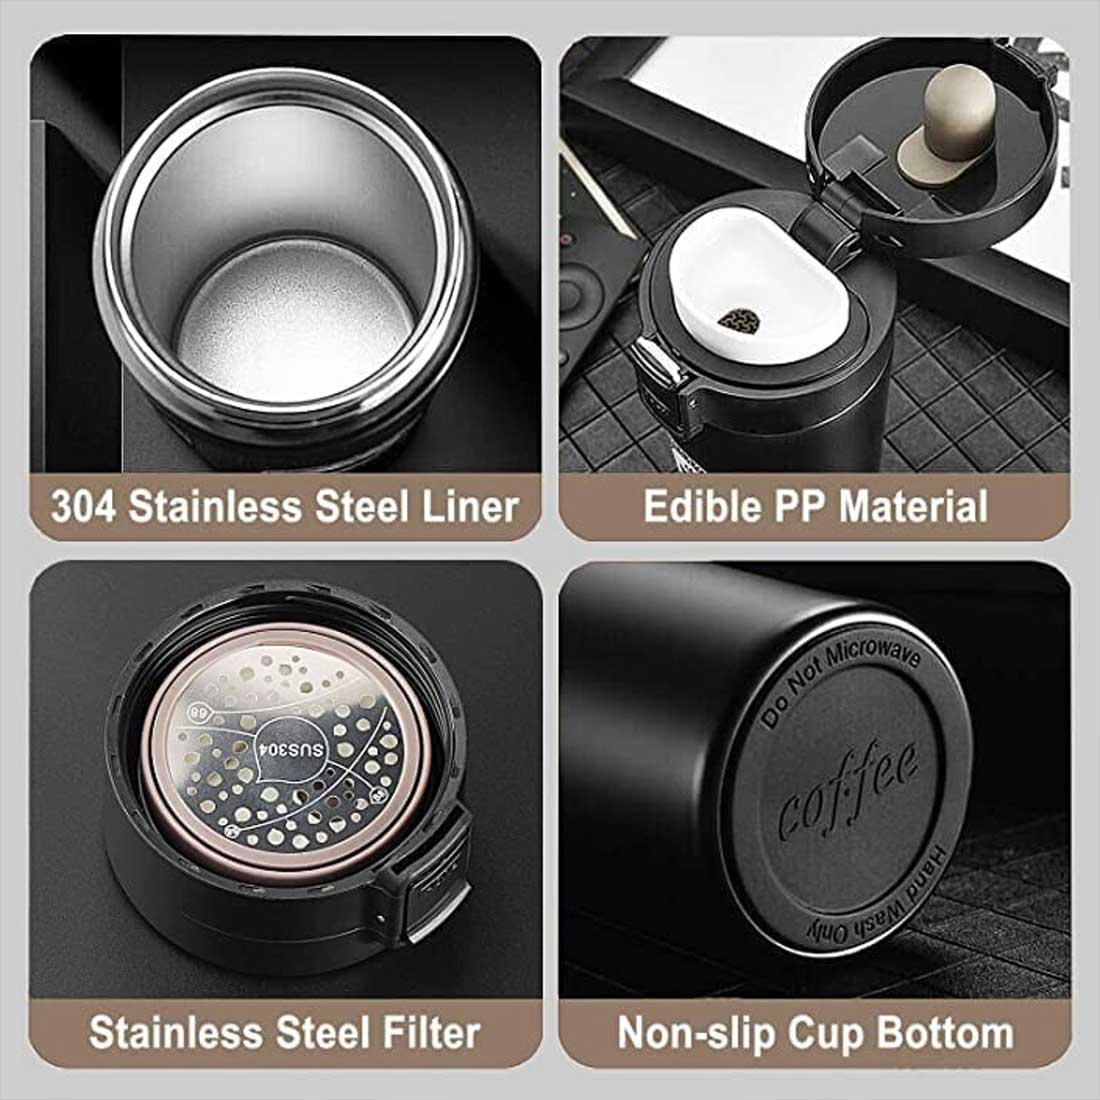 Customized Coffee Tumbler Insulated for Travelling Office Car Engraved Sipper Flask - Coffee Lover